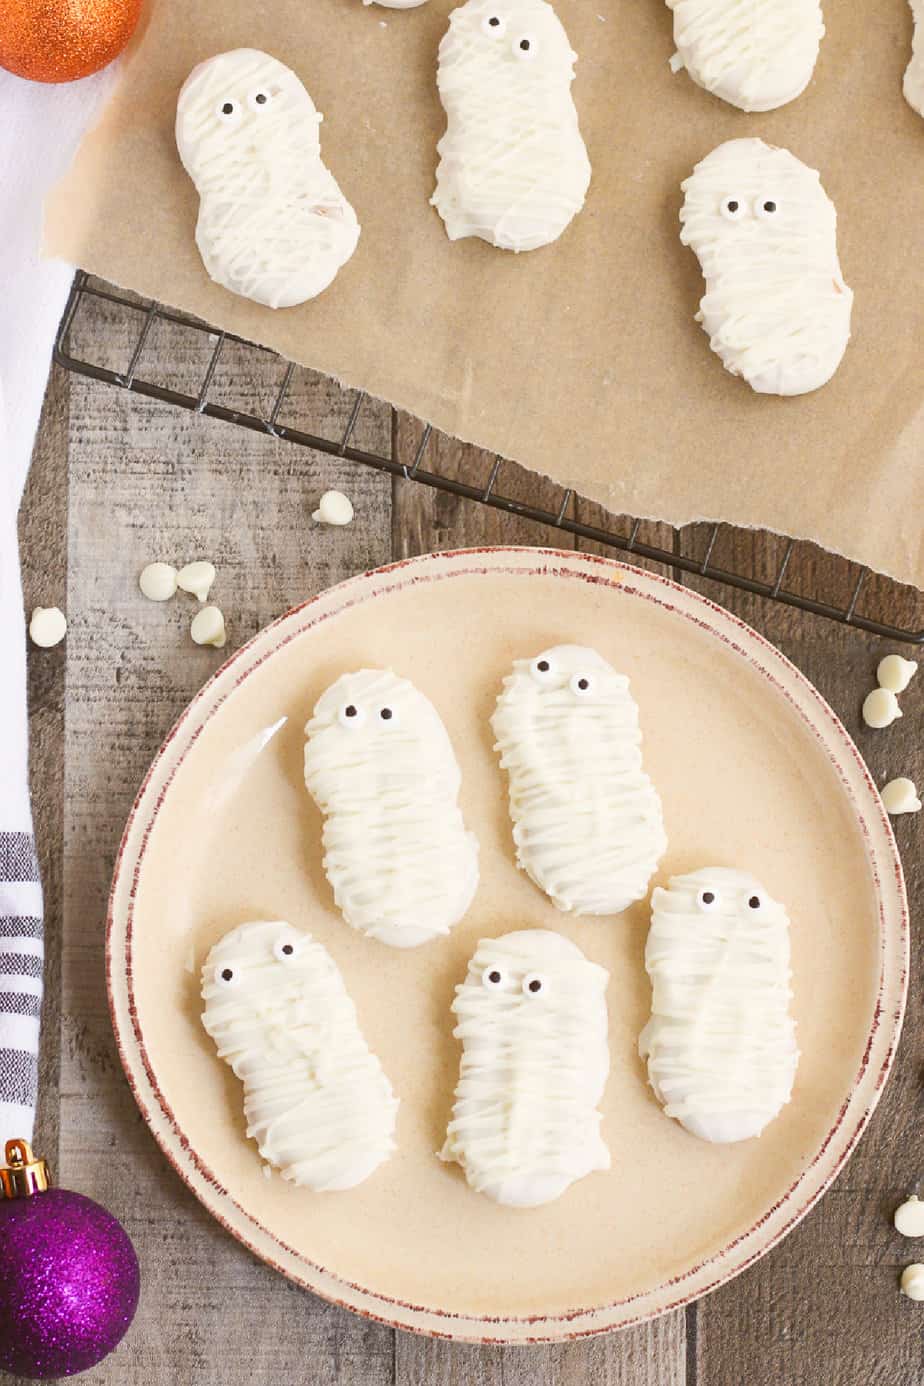 Cookies decorated to look like mummies with white chocolate on a plate with more on a tray on the table from overhead.